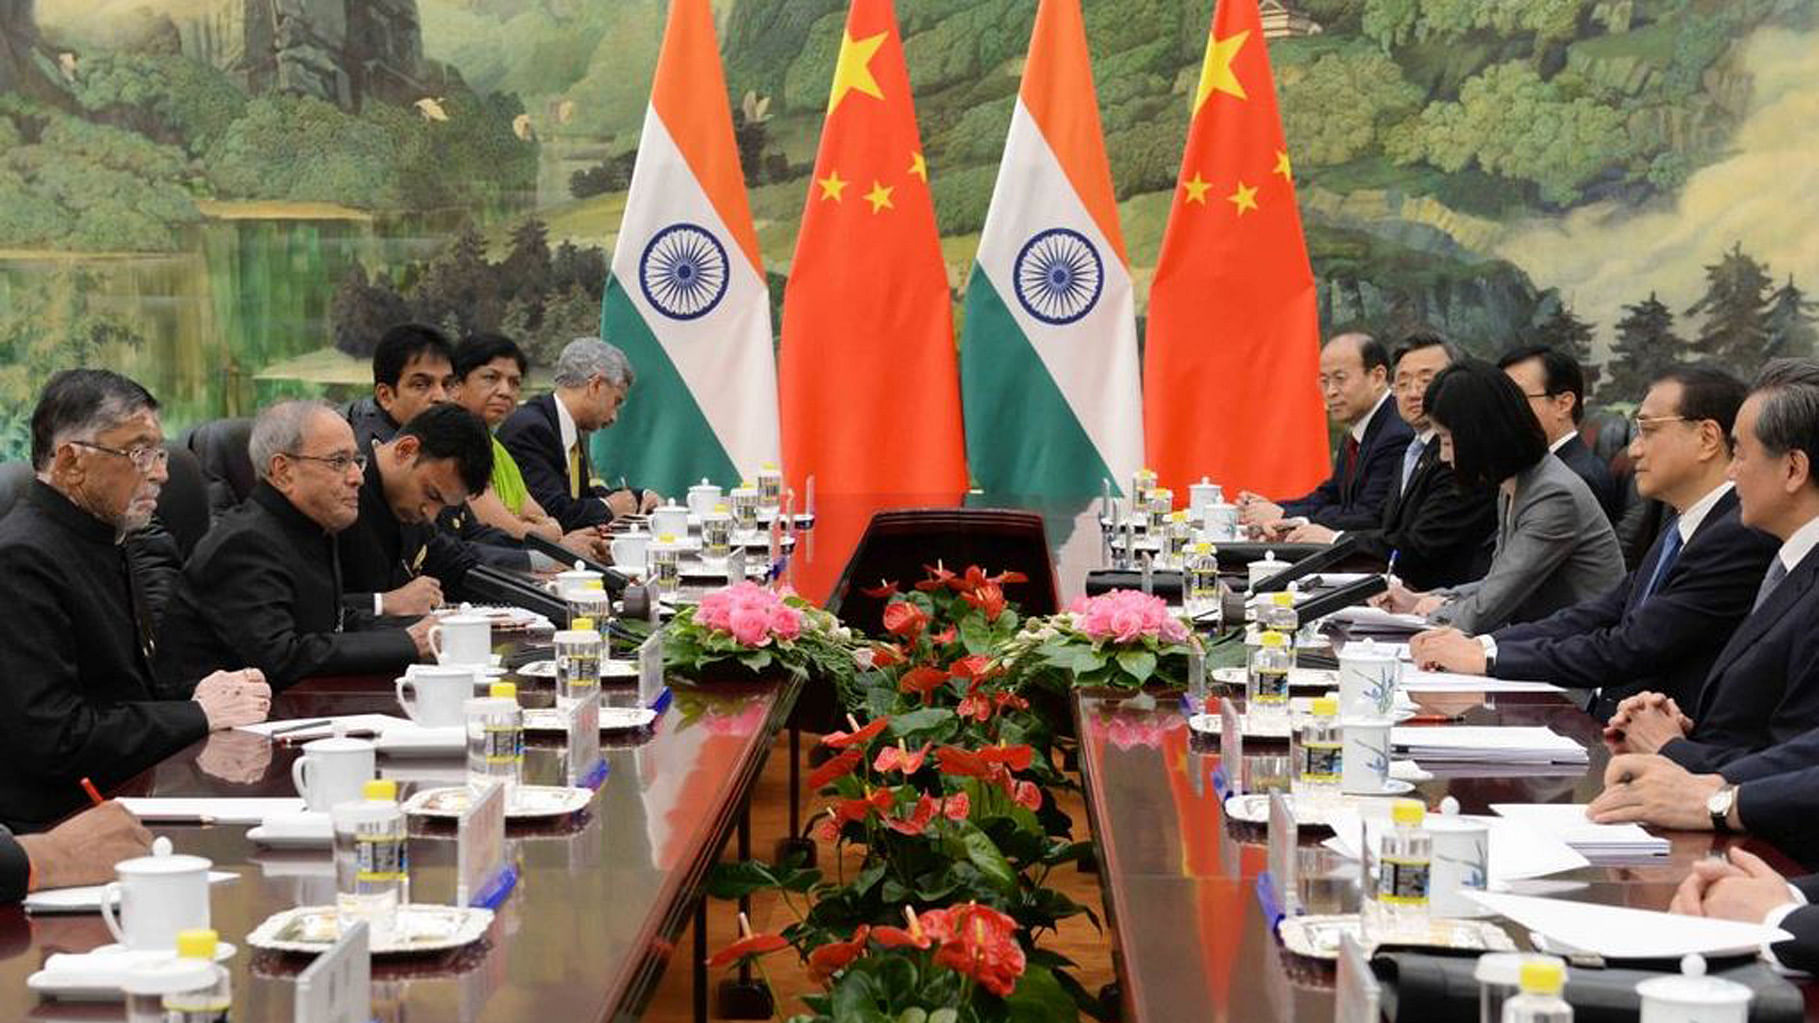 President Pranab Mukherjee with officials from the Chinese government. (Photo Courtesy: Twitter/<a href="https://twitter.com/RashtrapatiBhvn/status/735830793726119936">@RashtrapatiBhvn</a>)